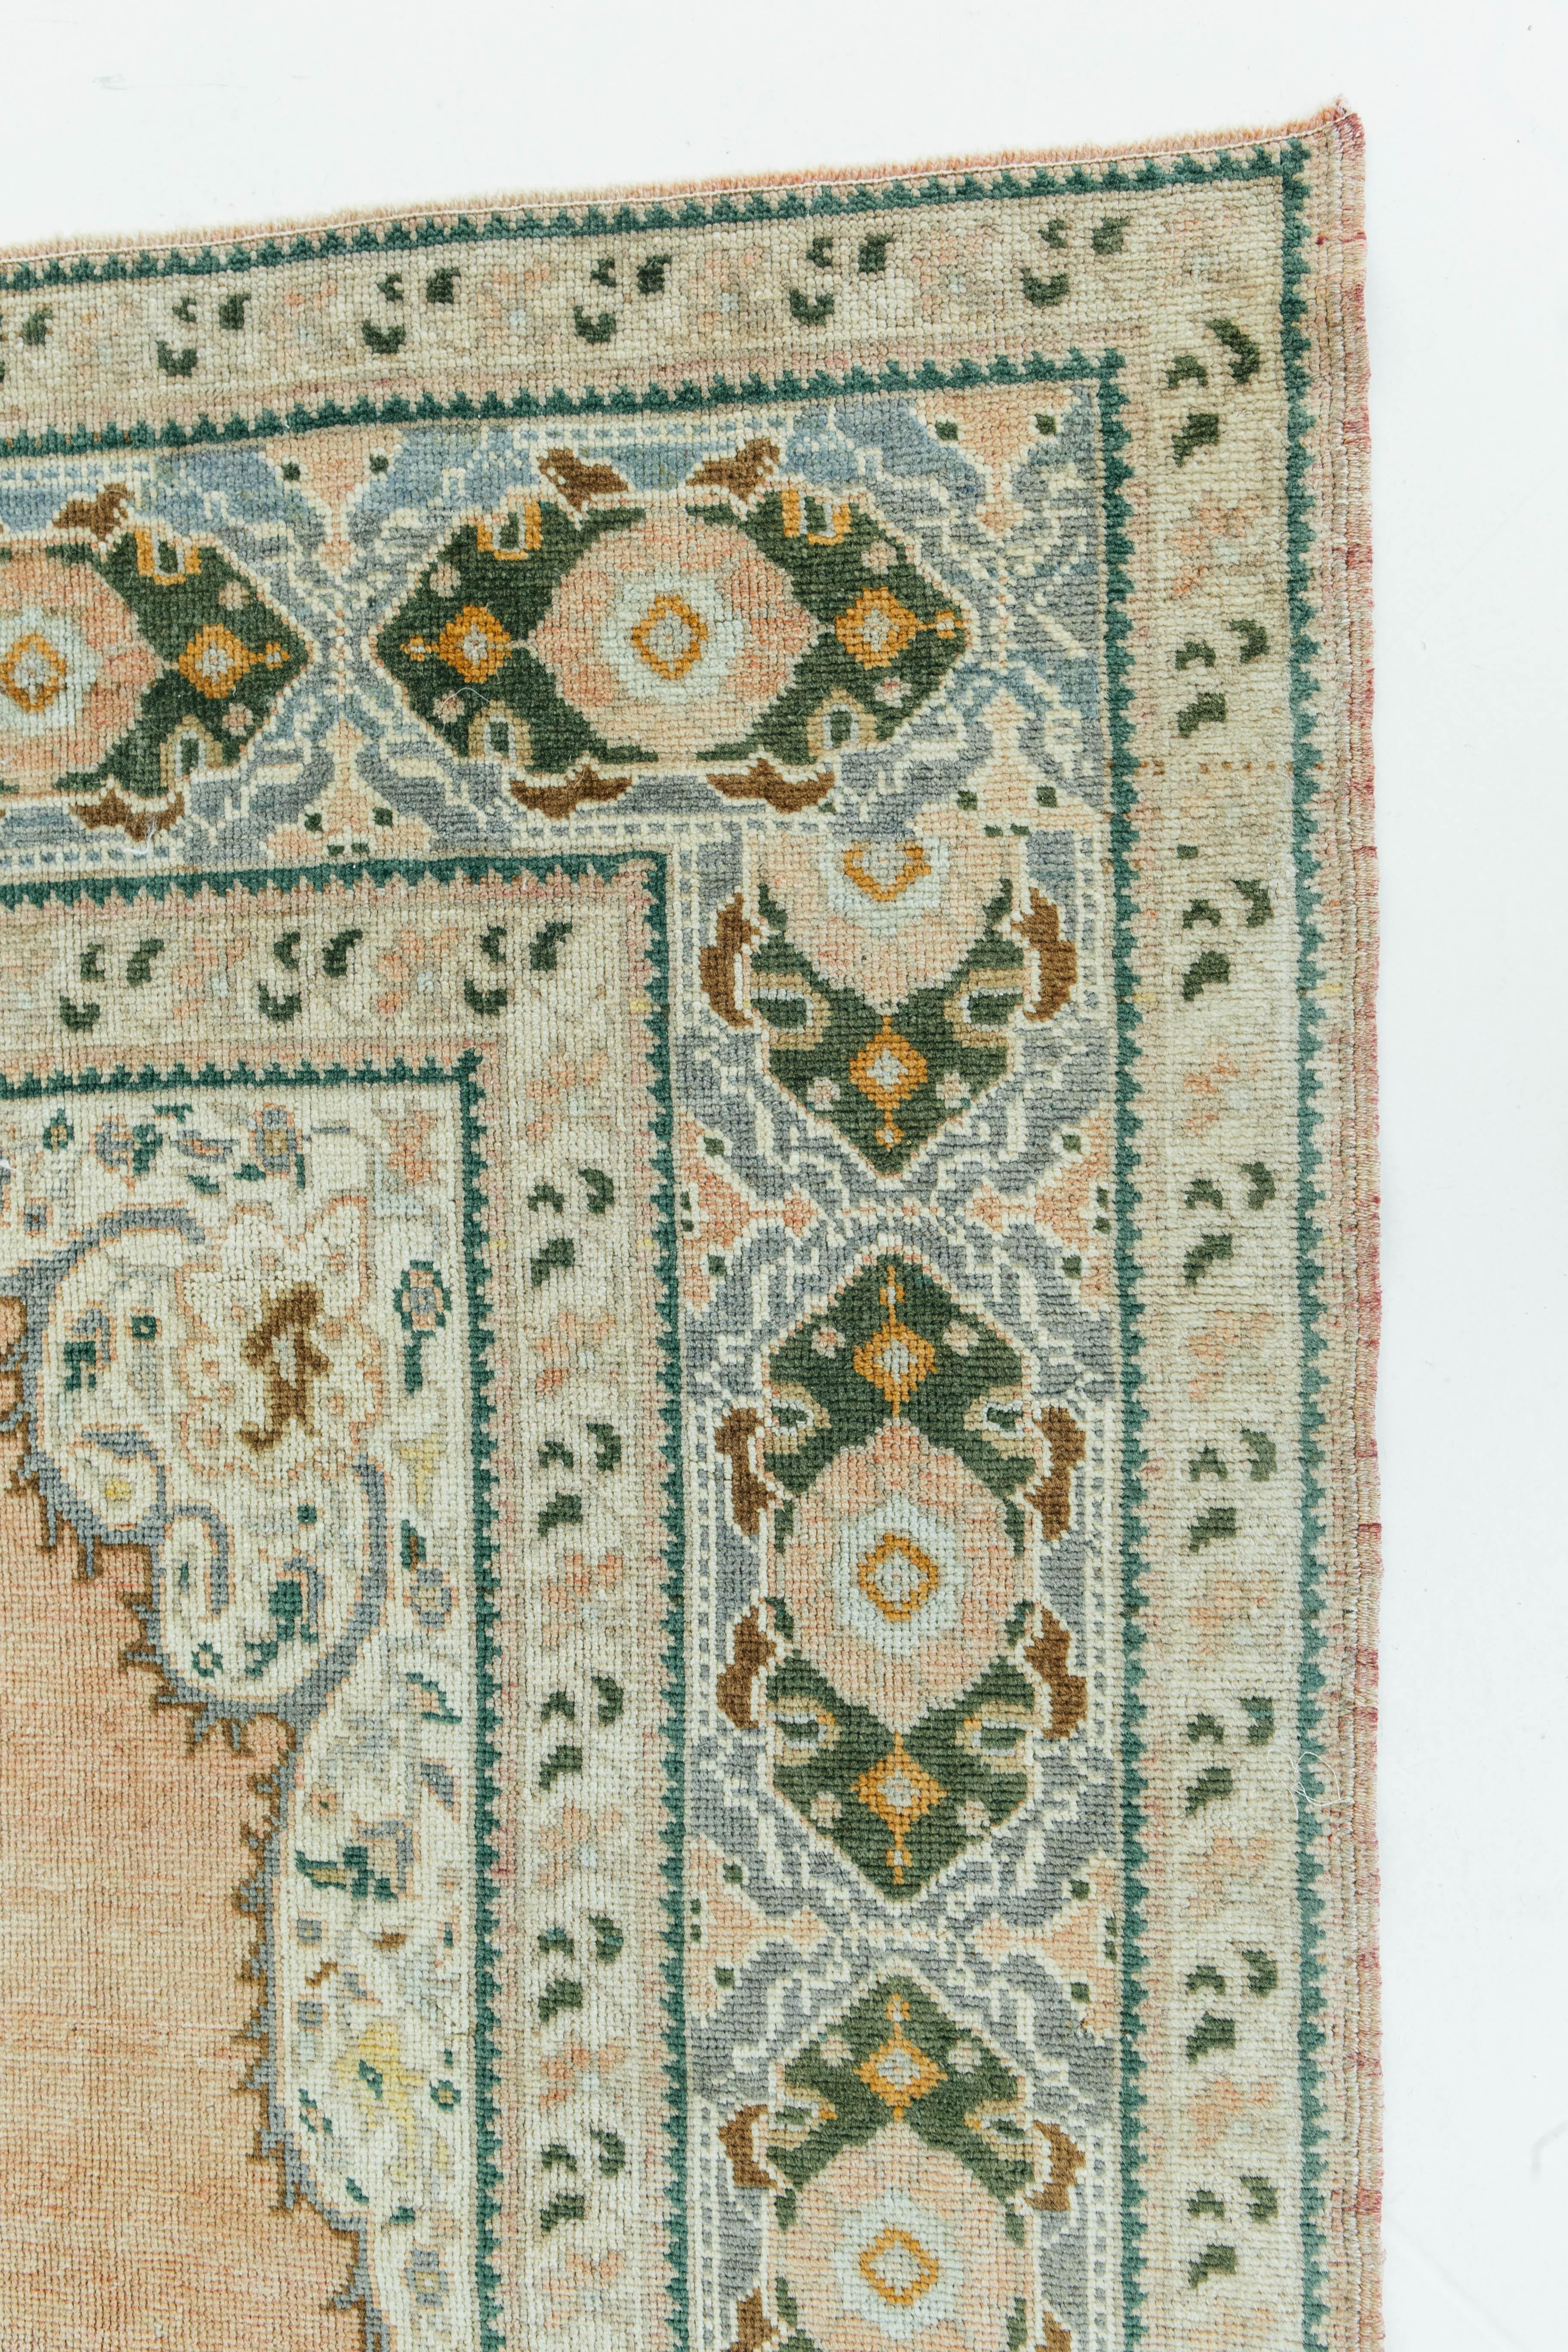 This vintage Turkish Anatolian rug weaves together dyes and colors, motifs, textures and techniques that are popular in Anatolia or Asia Minor. Anatolian rugs are known for their central medallions and symmetrical design. This vintage piece is